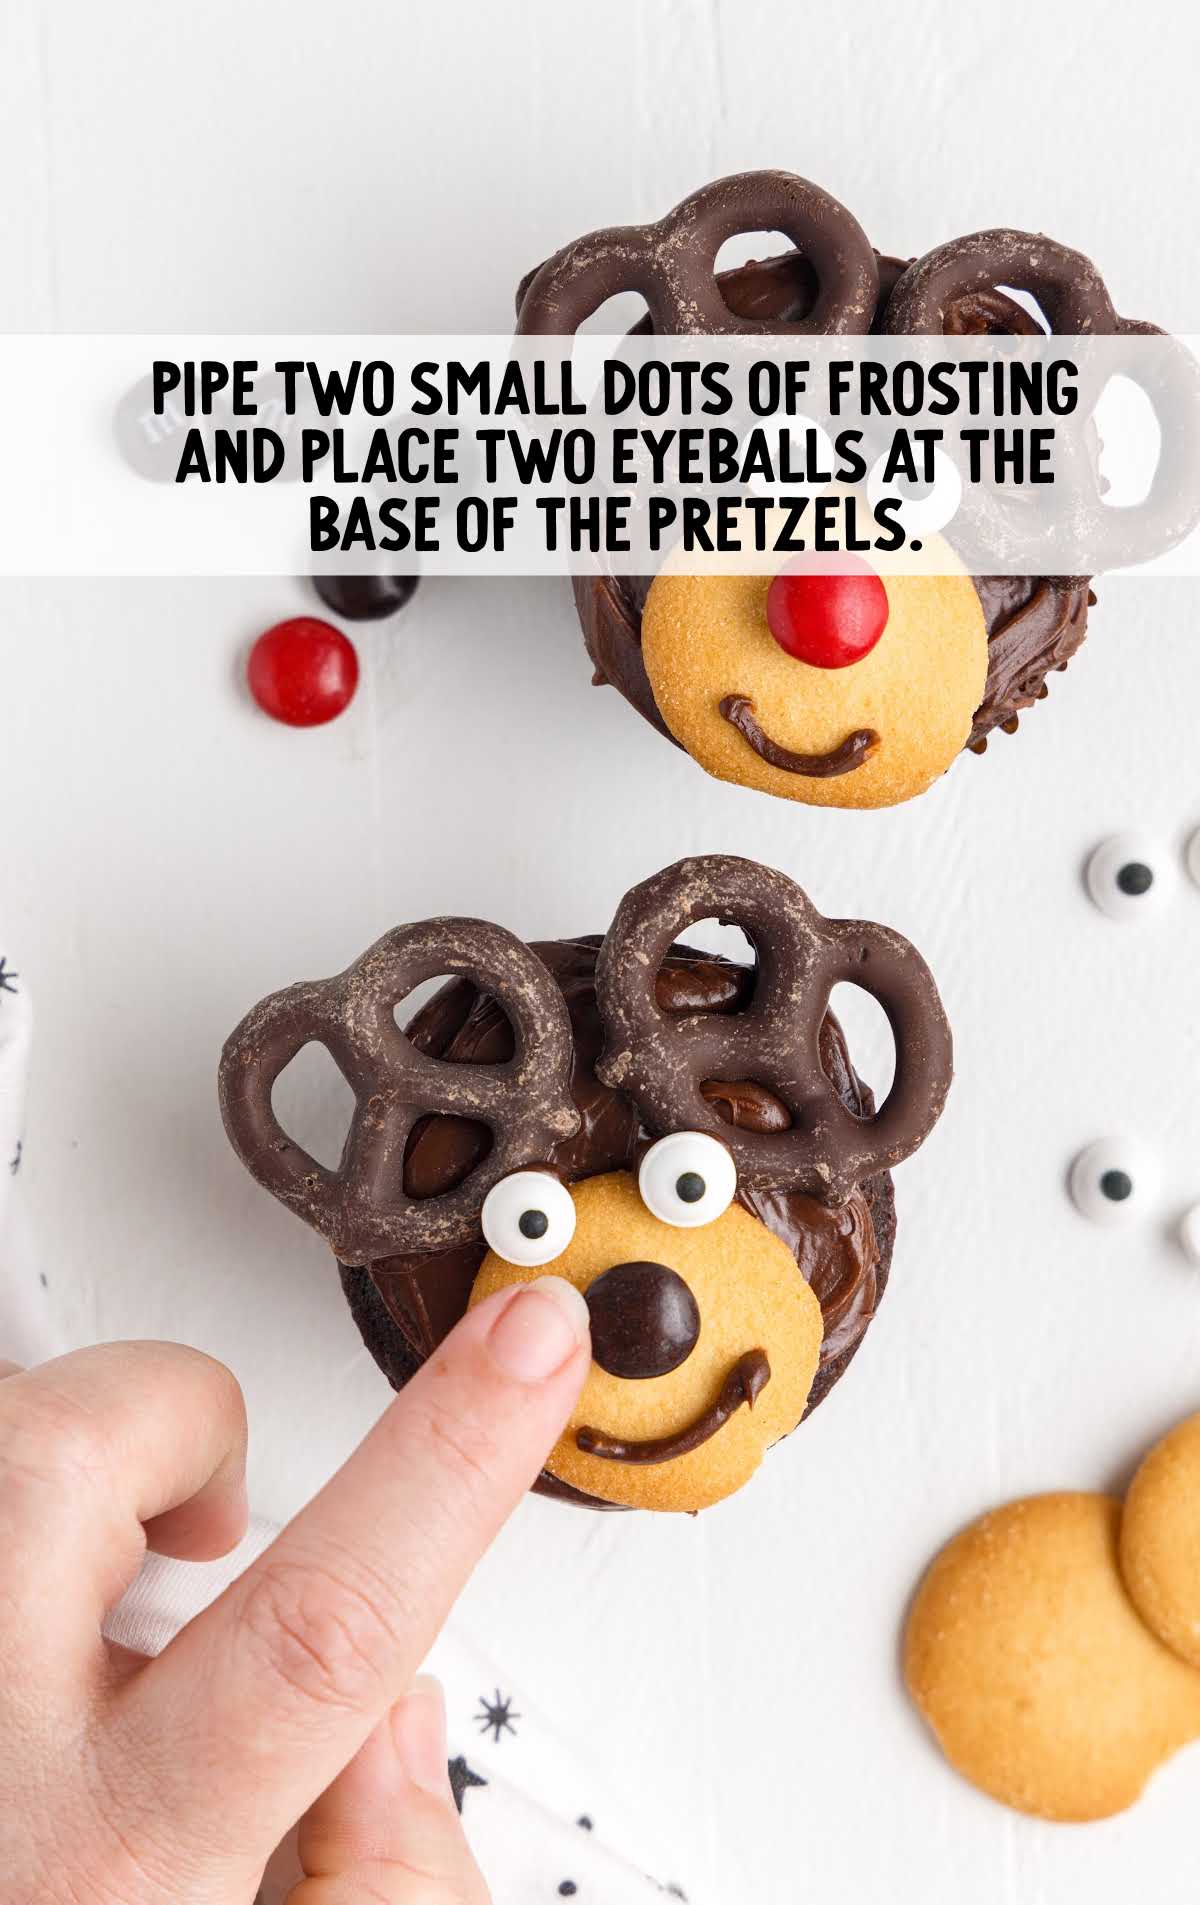 use frosting to place the two eyeballs